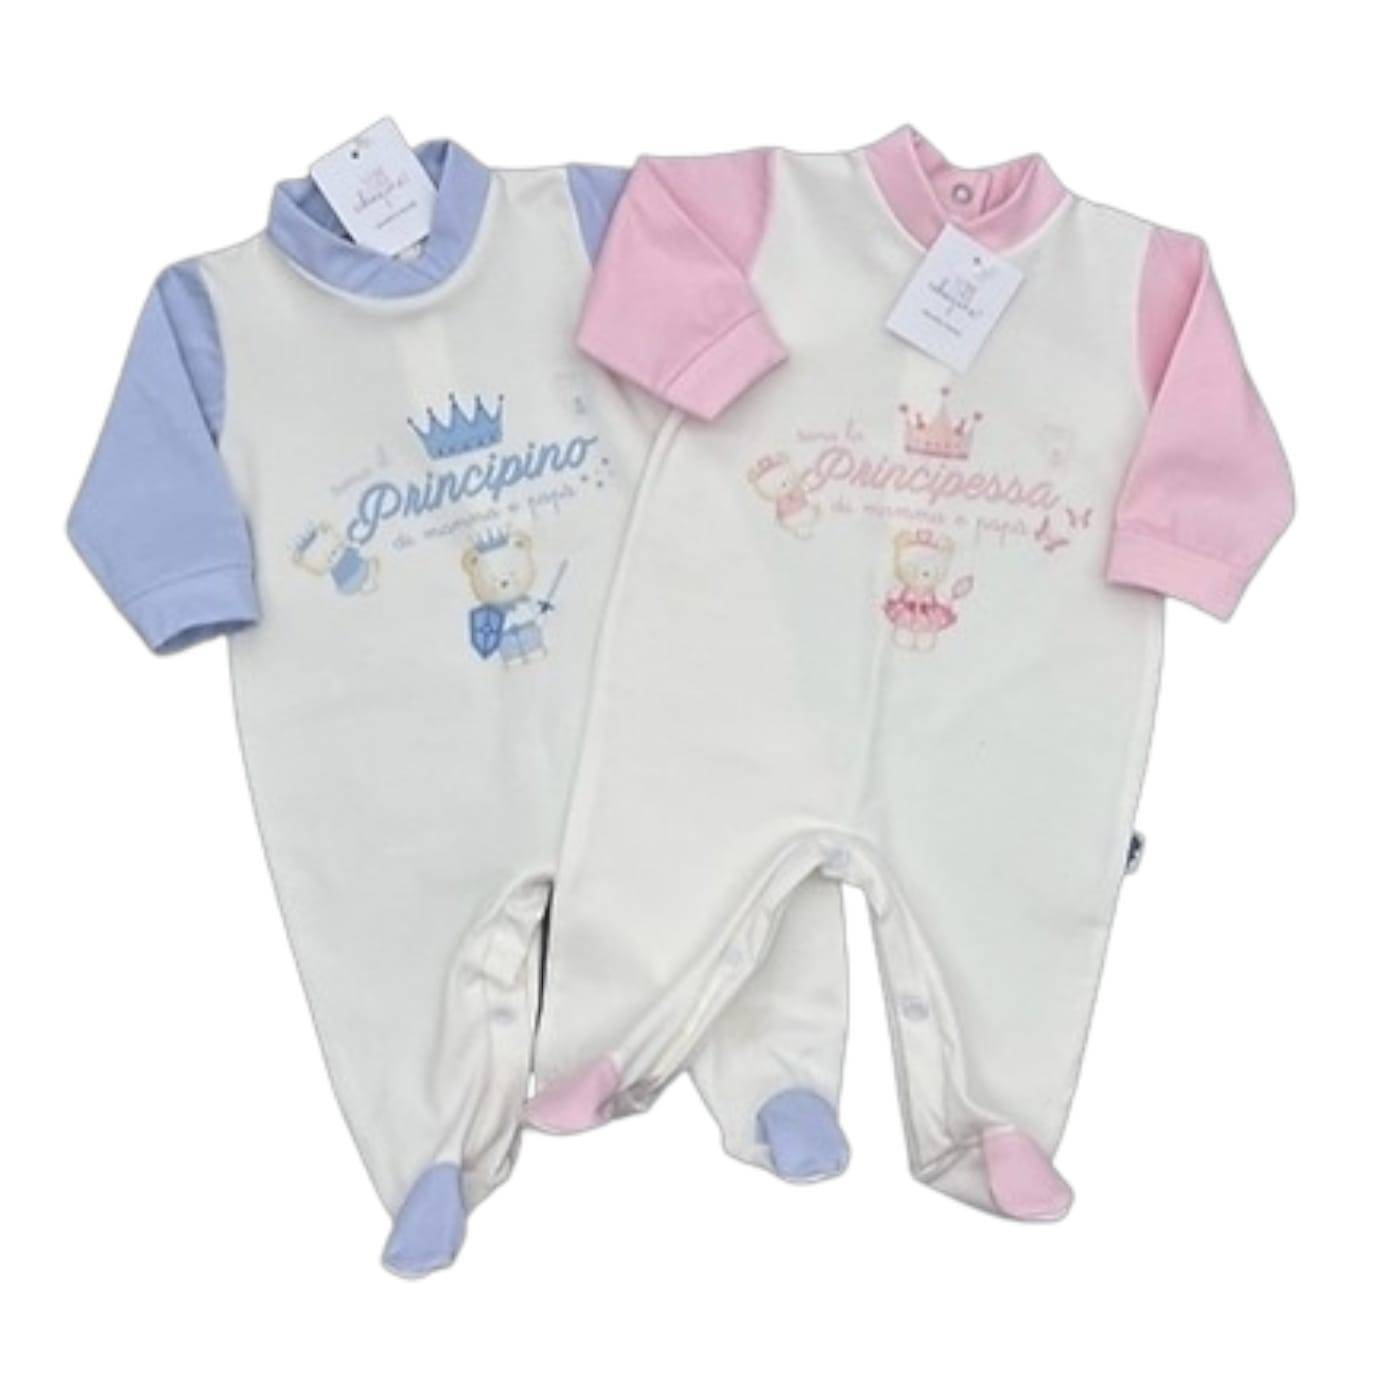 Infant Newborn Baby Boy and Girl Monthly Milestone Outfits